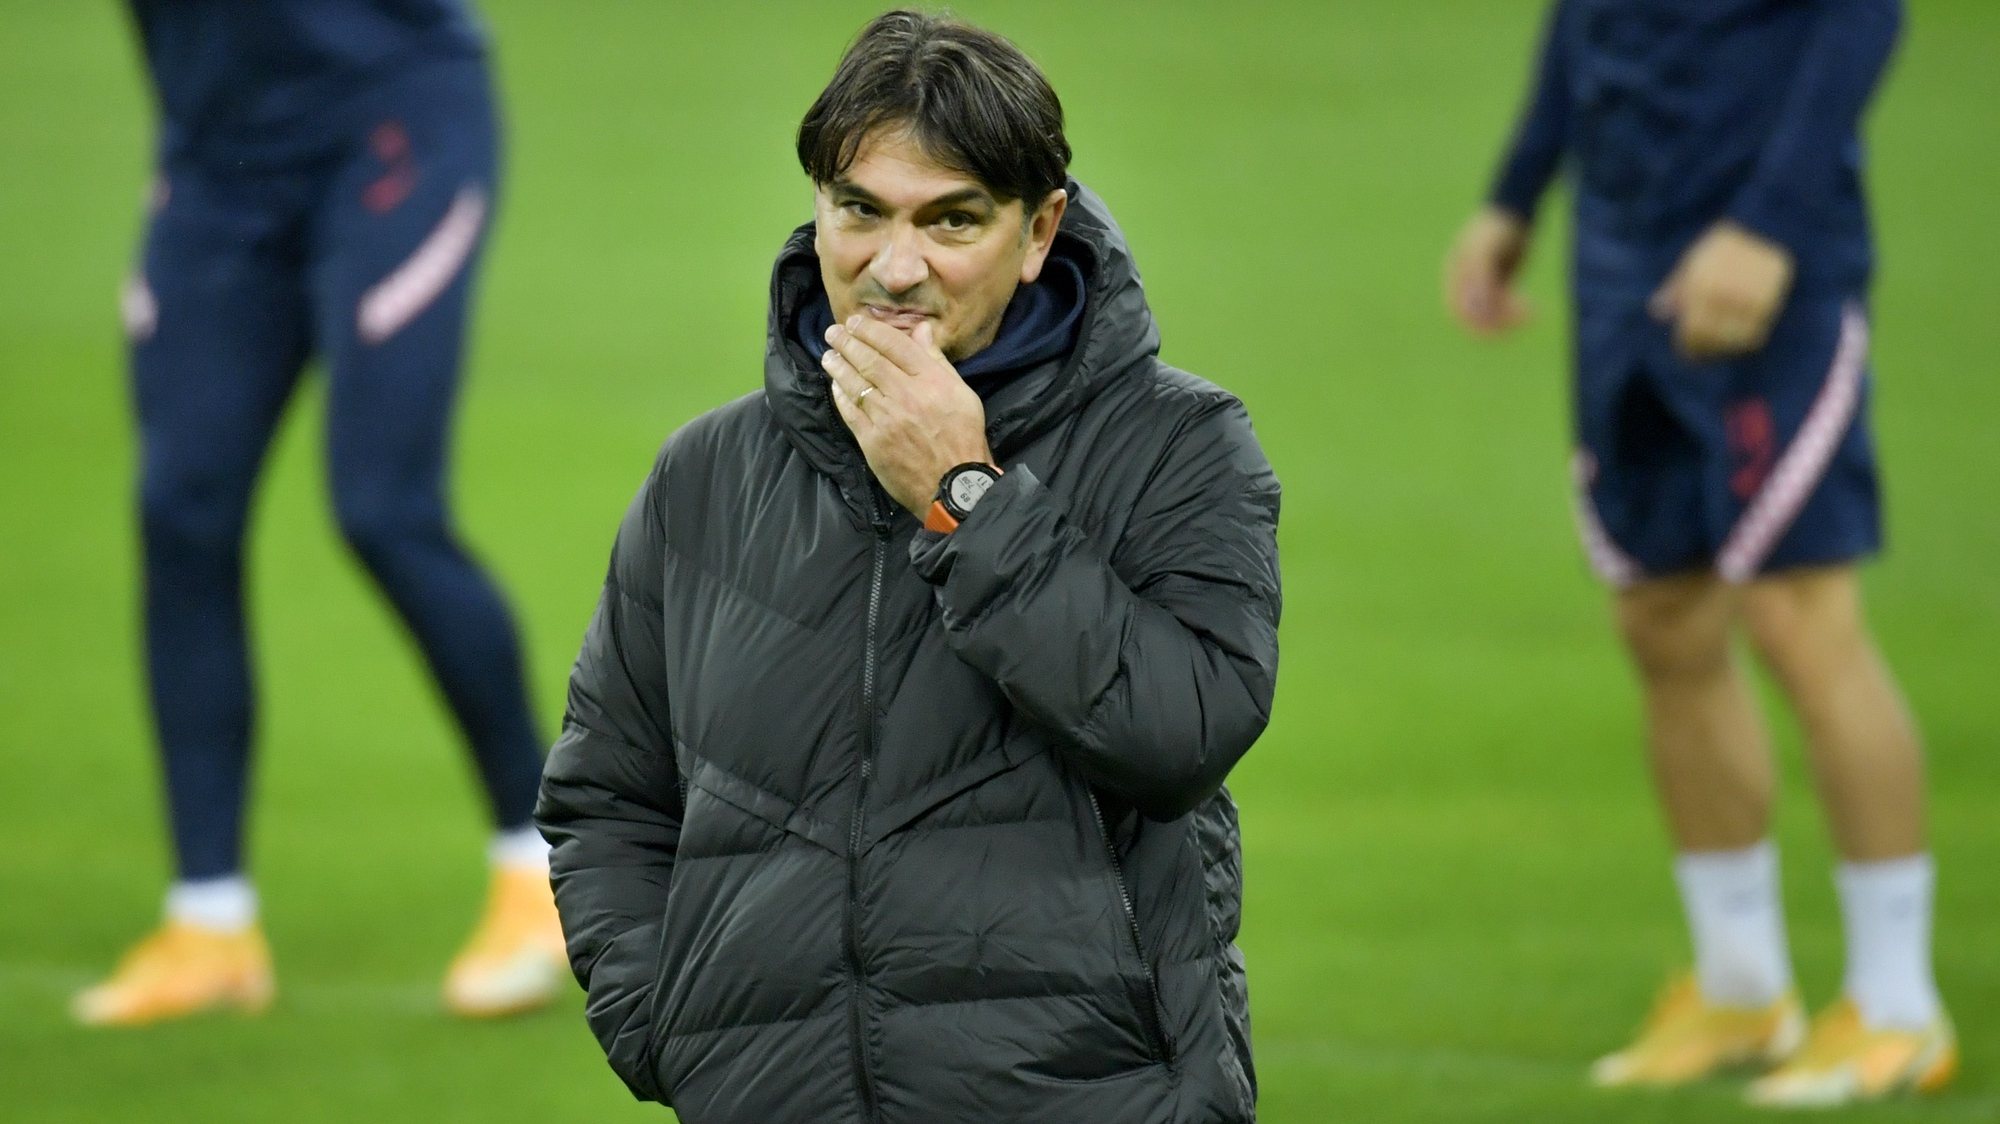 epa08818610 Head coach of Croatian national soccer team, Zlatko Dalic reacts during a training session on the eve of the UEFA Nations League group stage match between Sweden and Croatia at Friends Arena in Stockholm, Sweden, 13 November 2020.  EPA/Anders Wiklund SWEDEN OUT